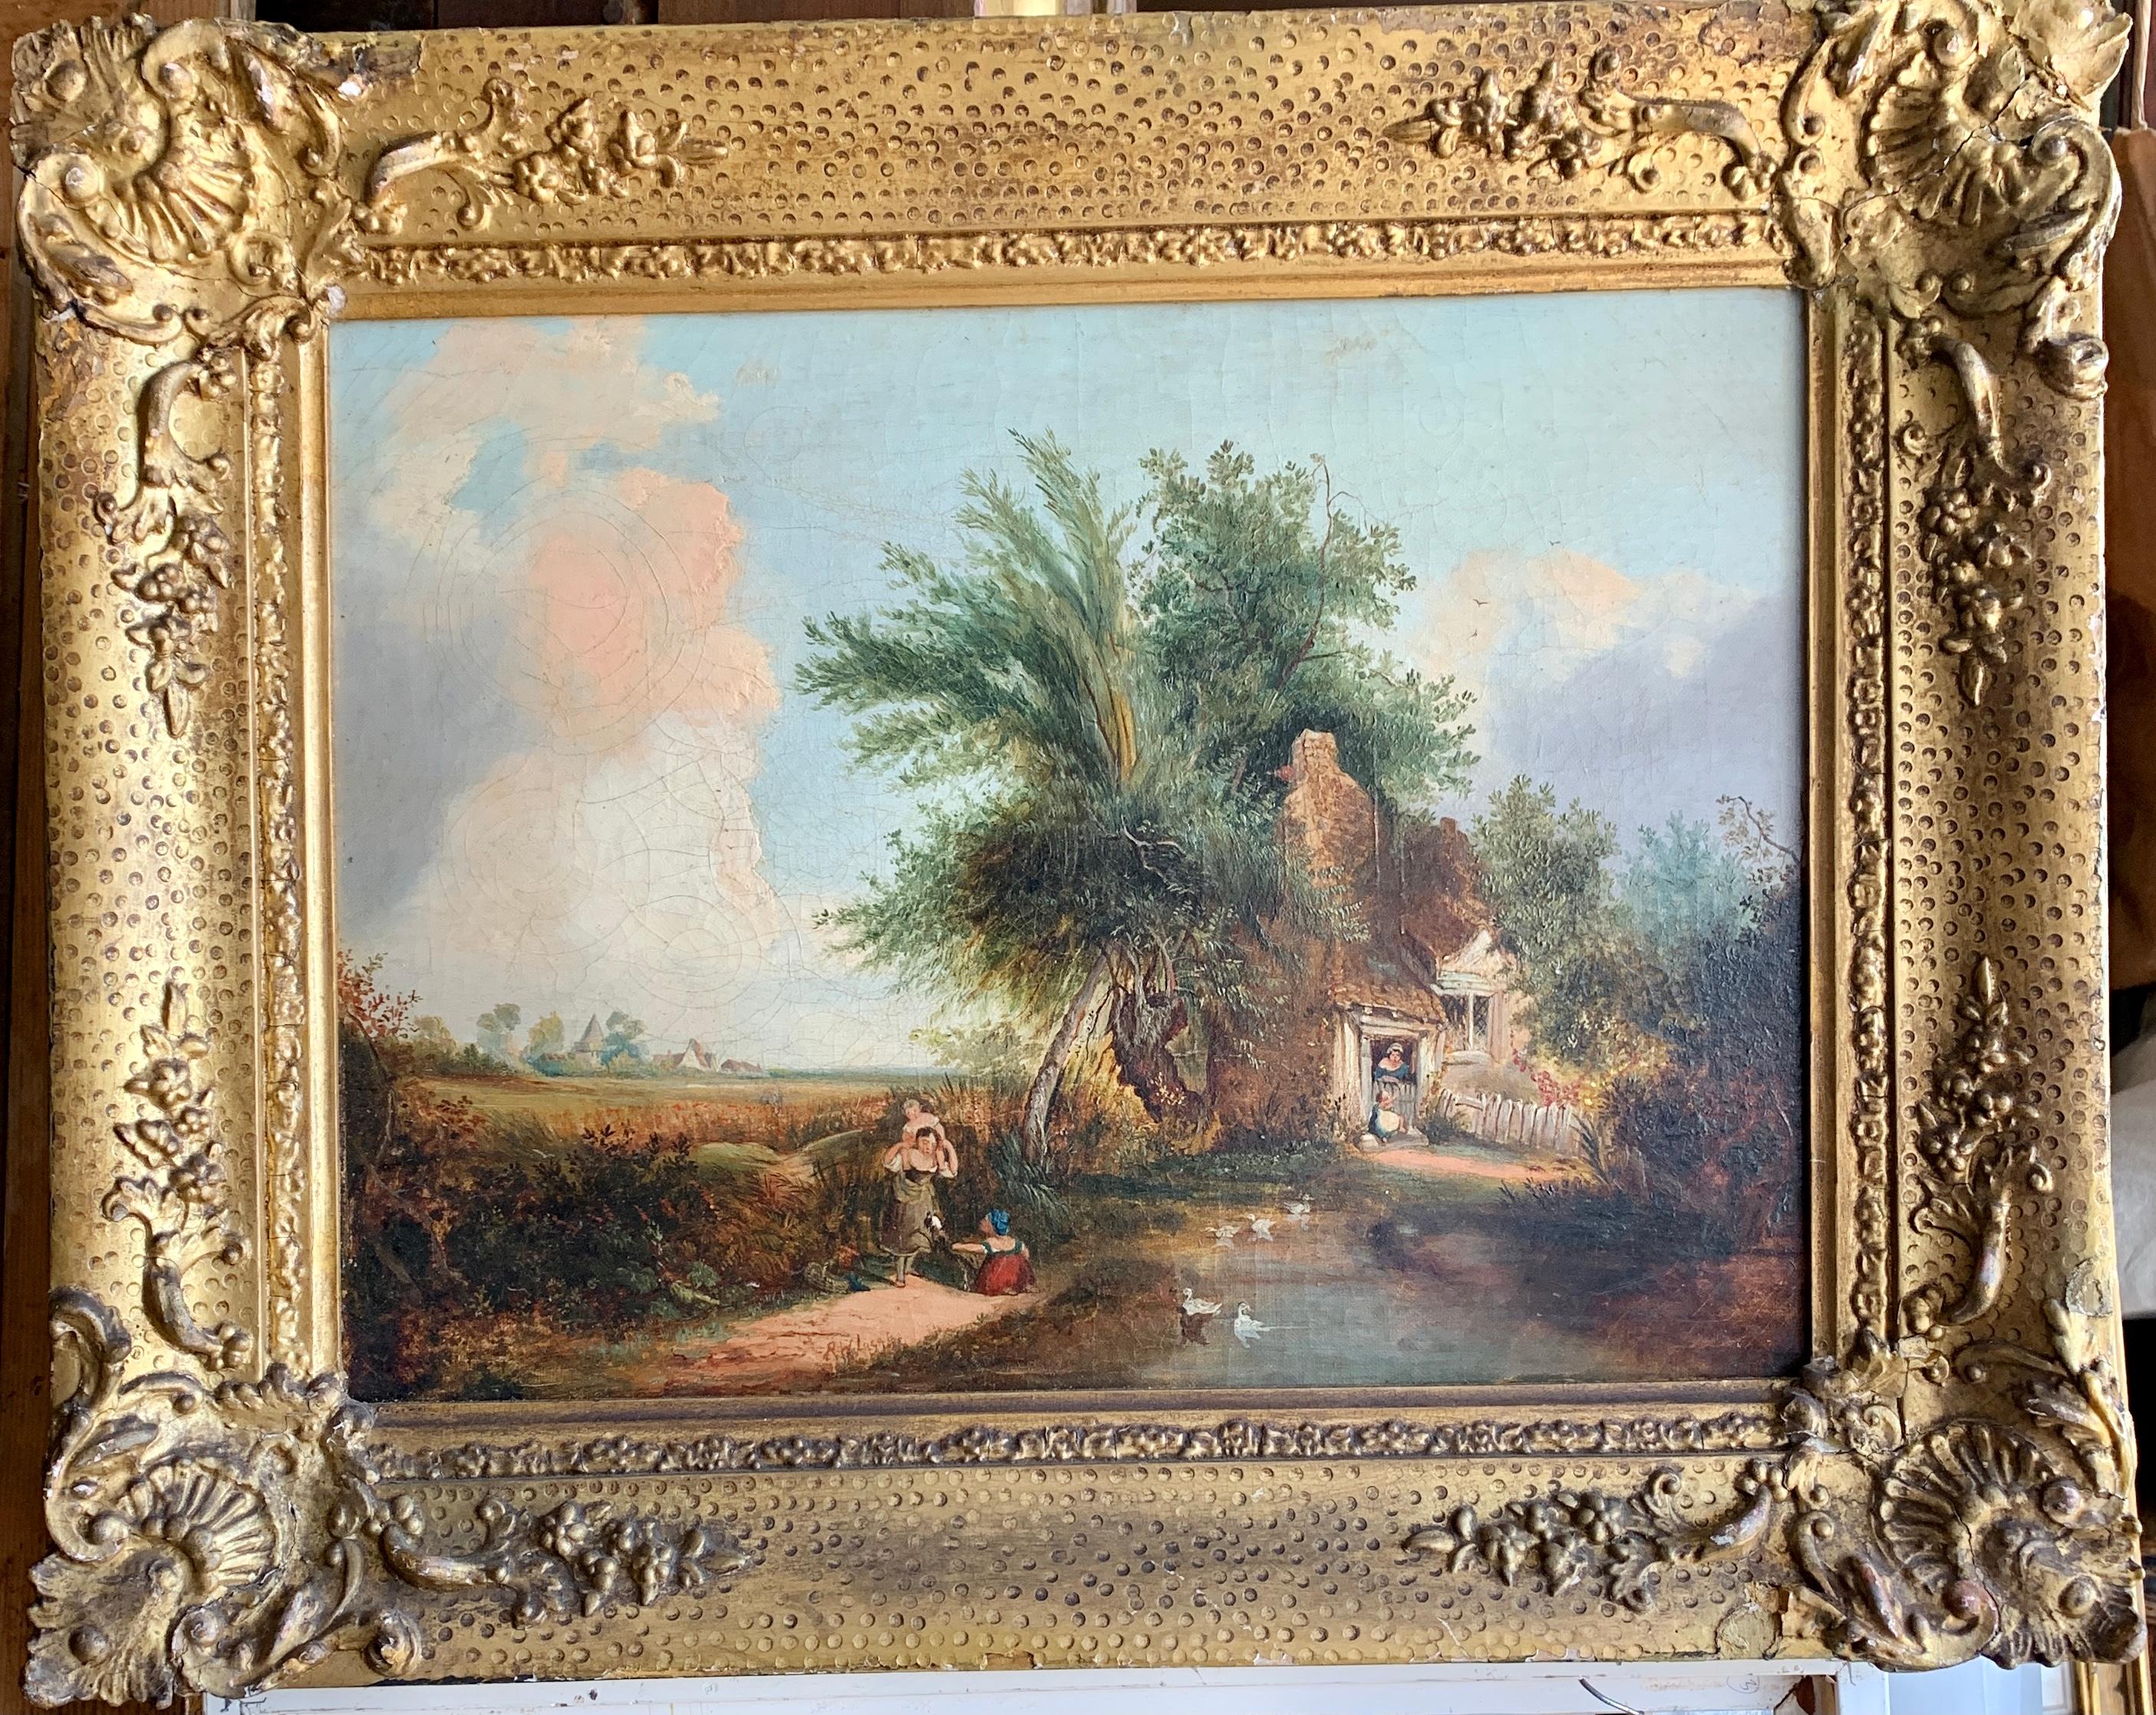 19th century English Folk Art Cottage landscape with figures playing by a pond